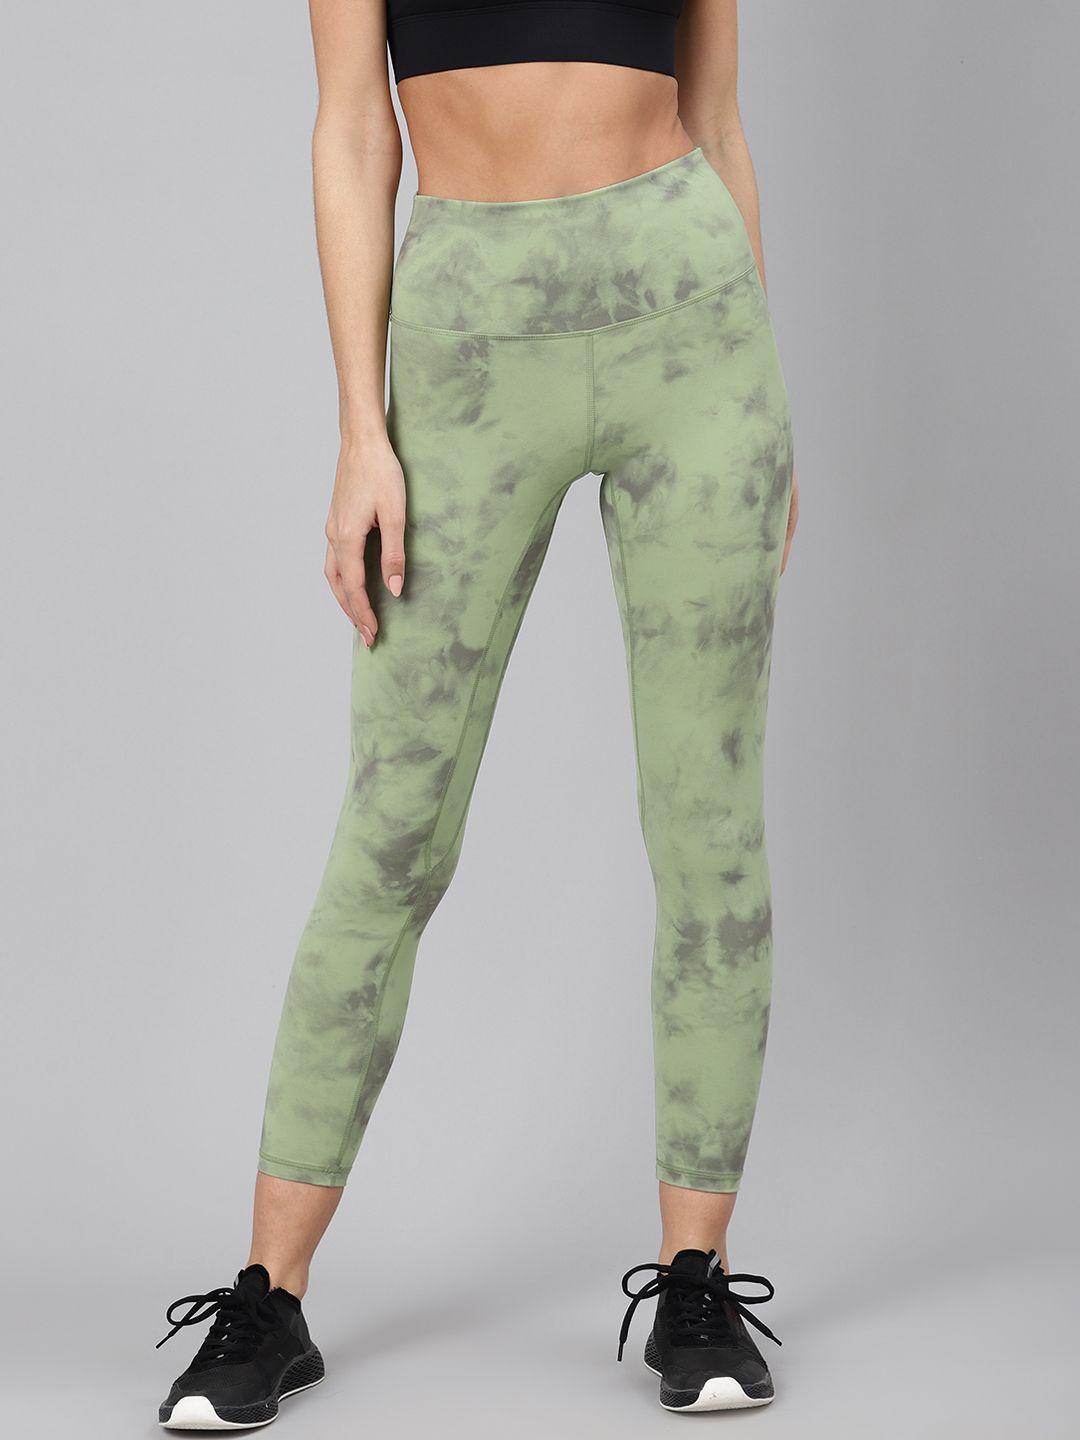 fitkin women green & black tie & dye printed quick dry cropped training tights